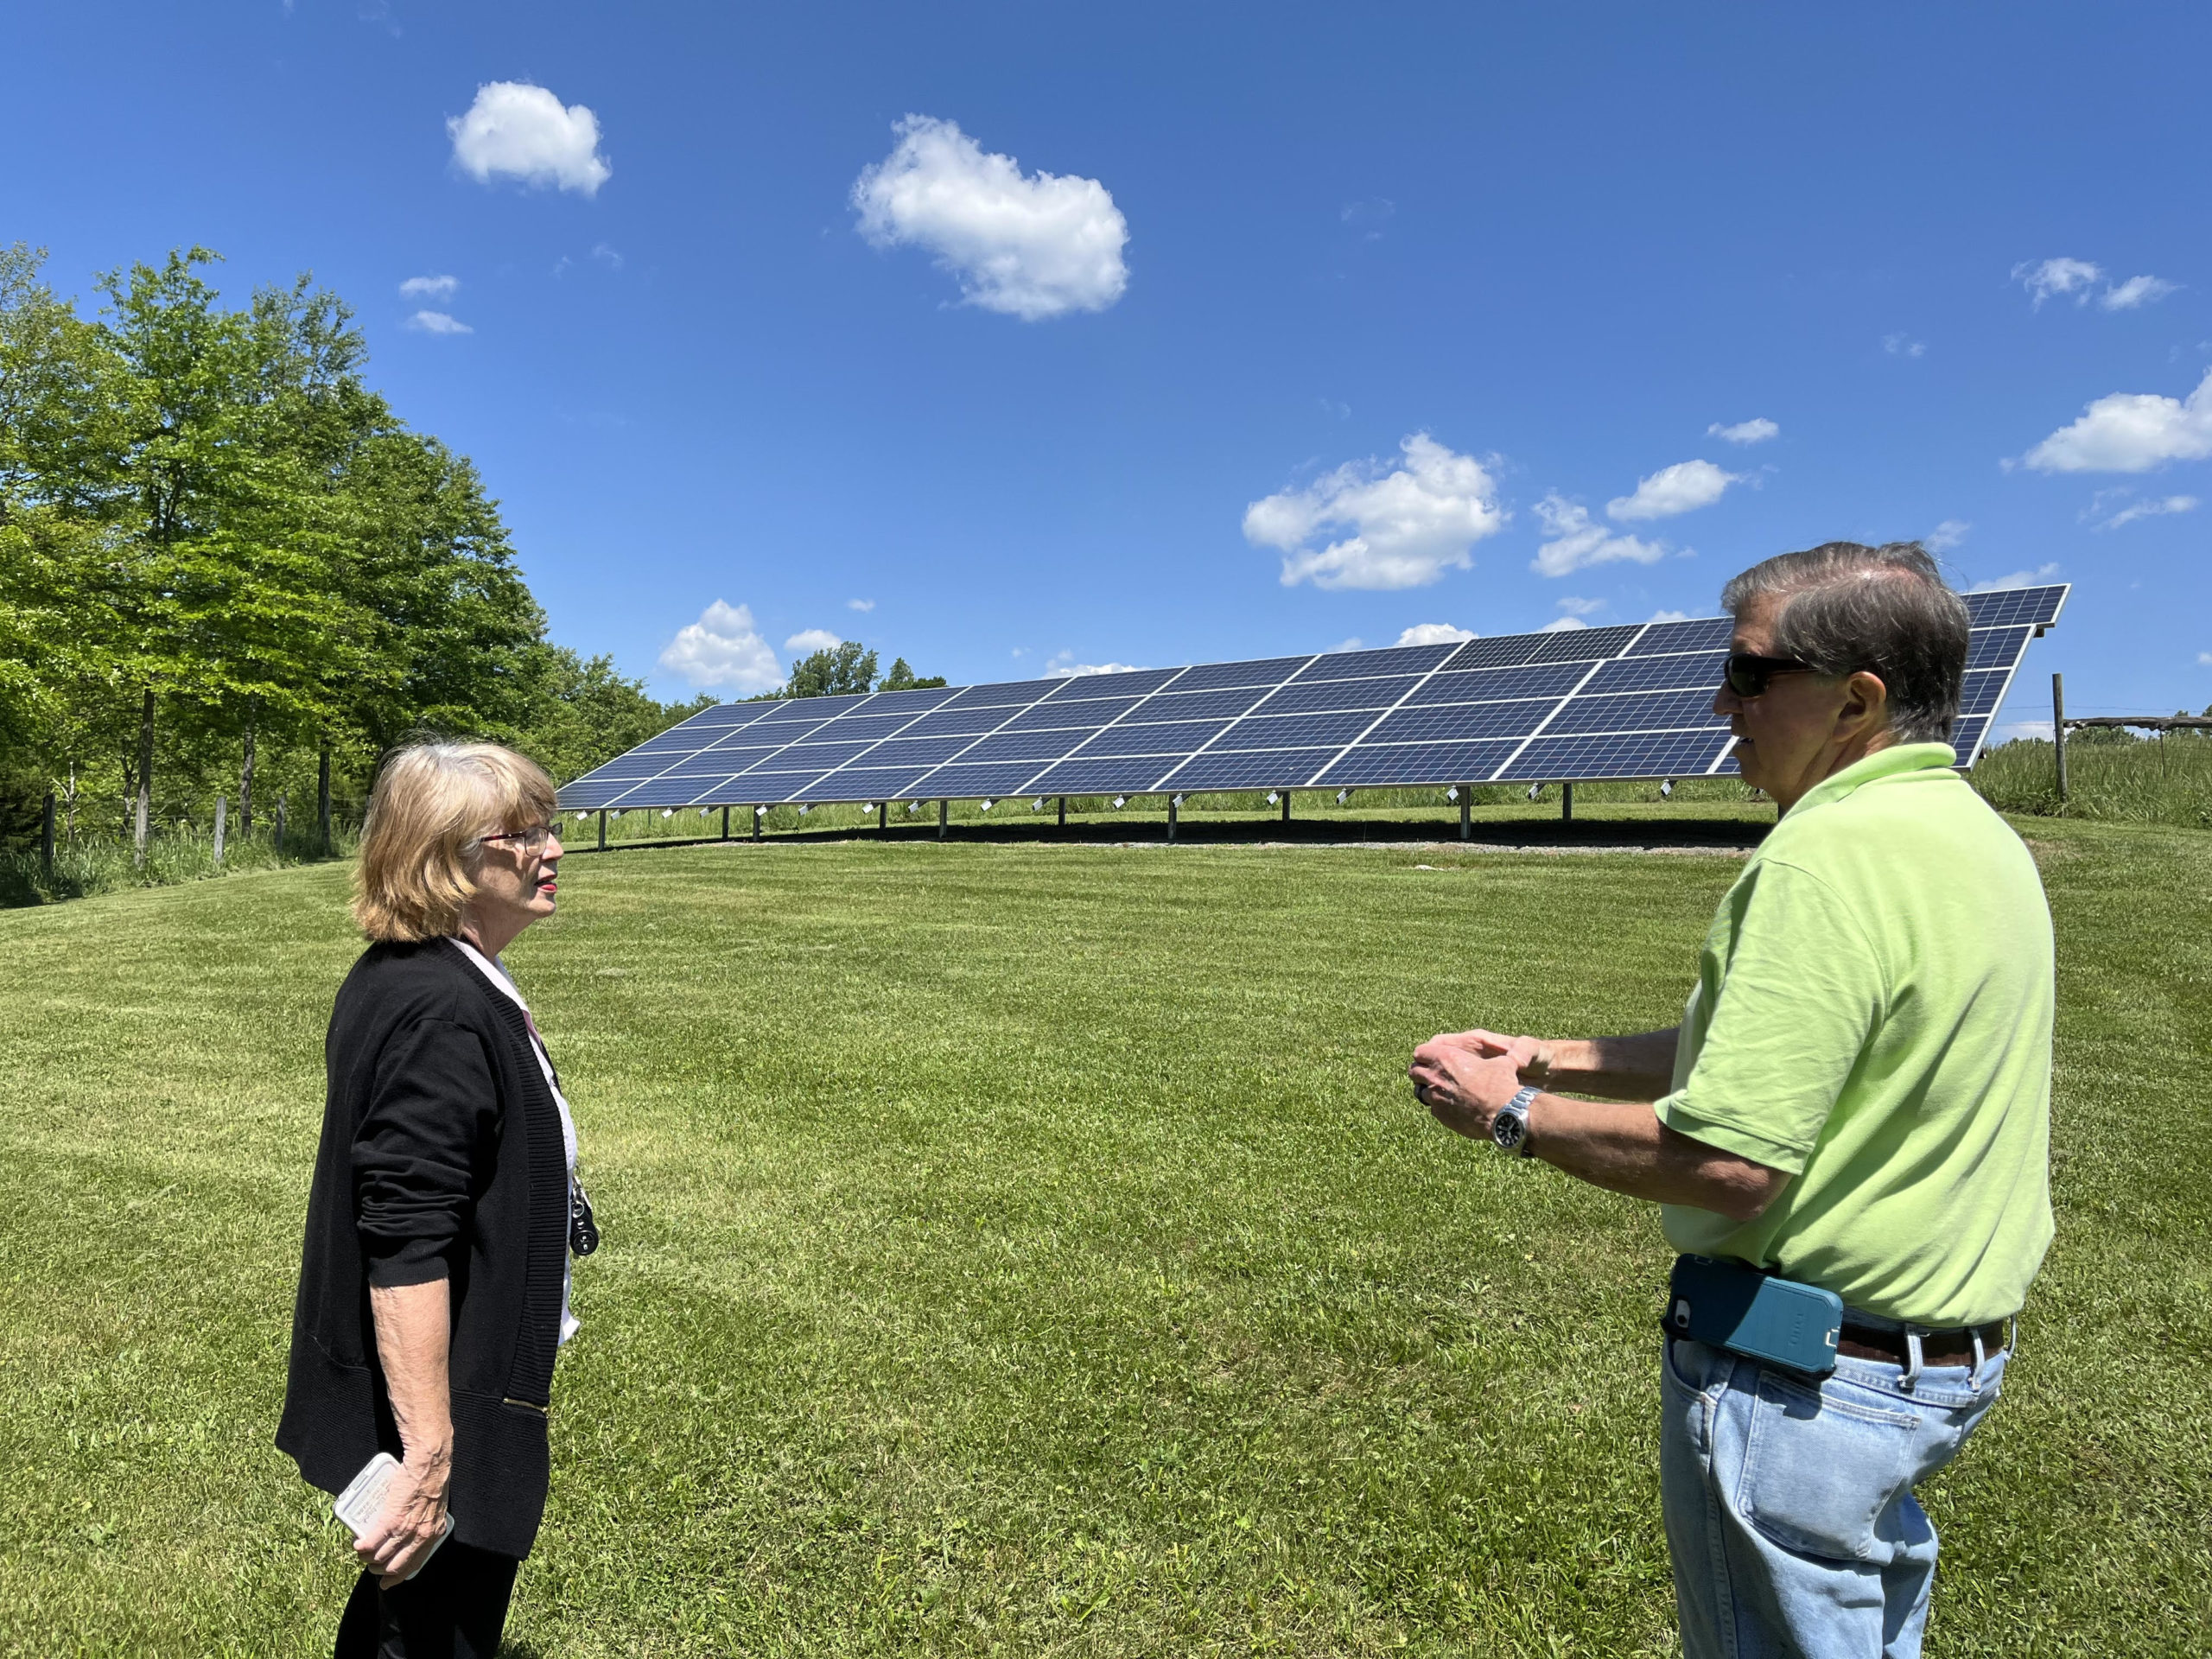 a man and woman stand on a lawn in front of a ground-mounted solar array